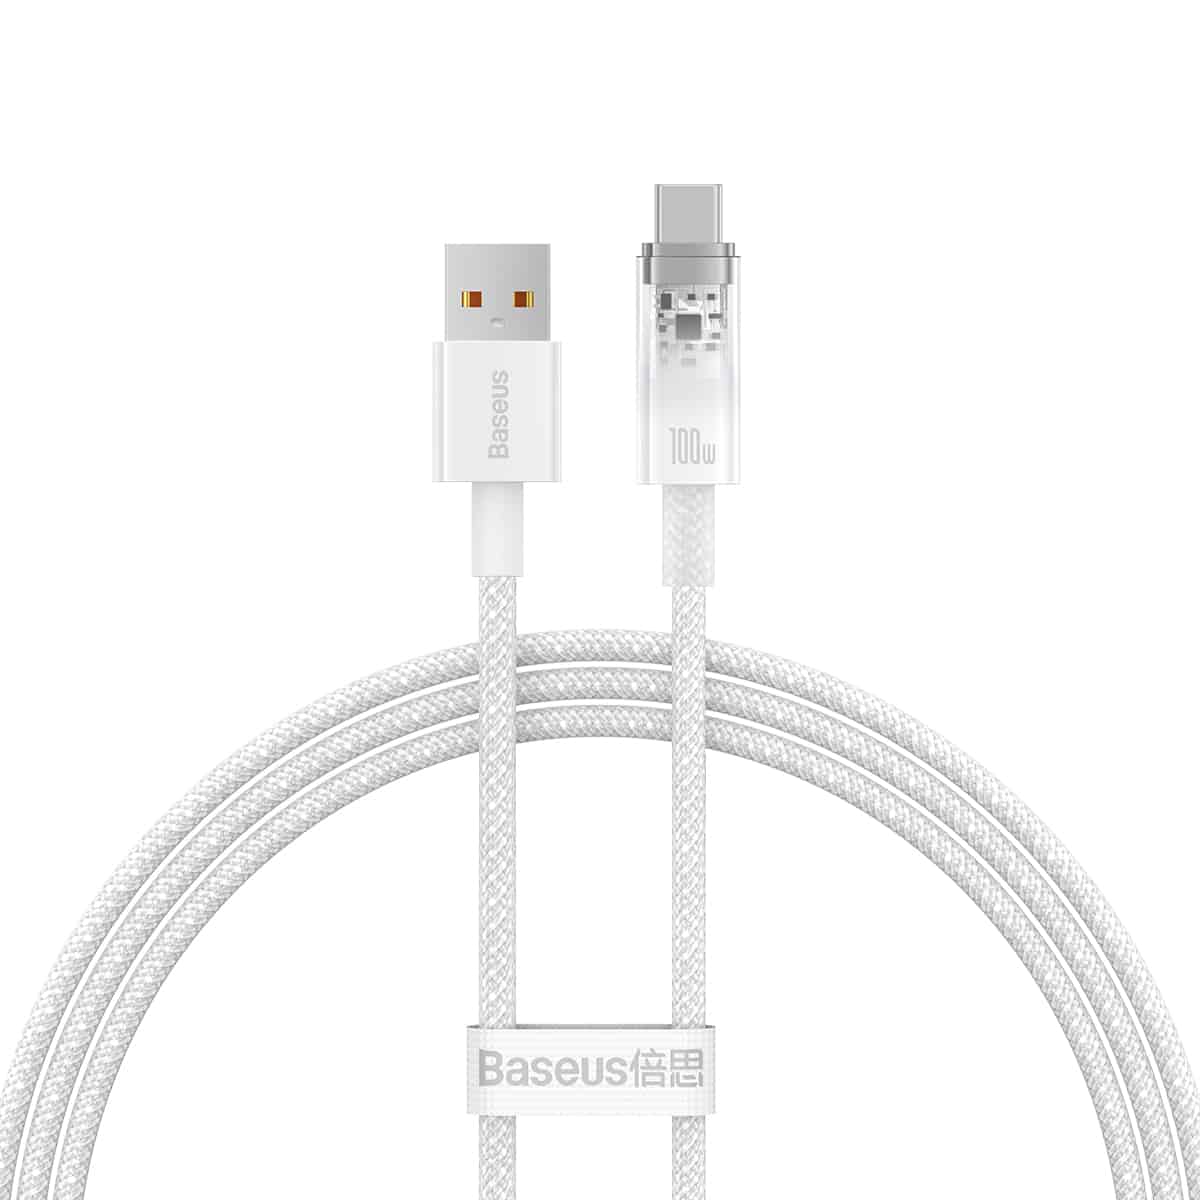 Baseus Explorer Series Fast Charging Cable with Smart Temperature Control USB to Type-C 100W